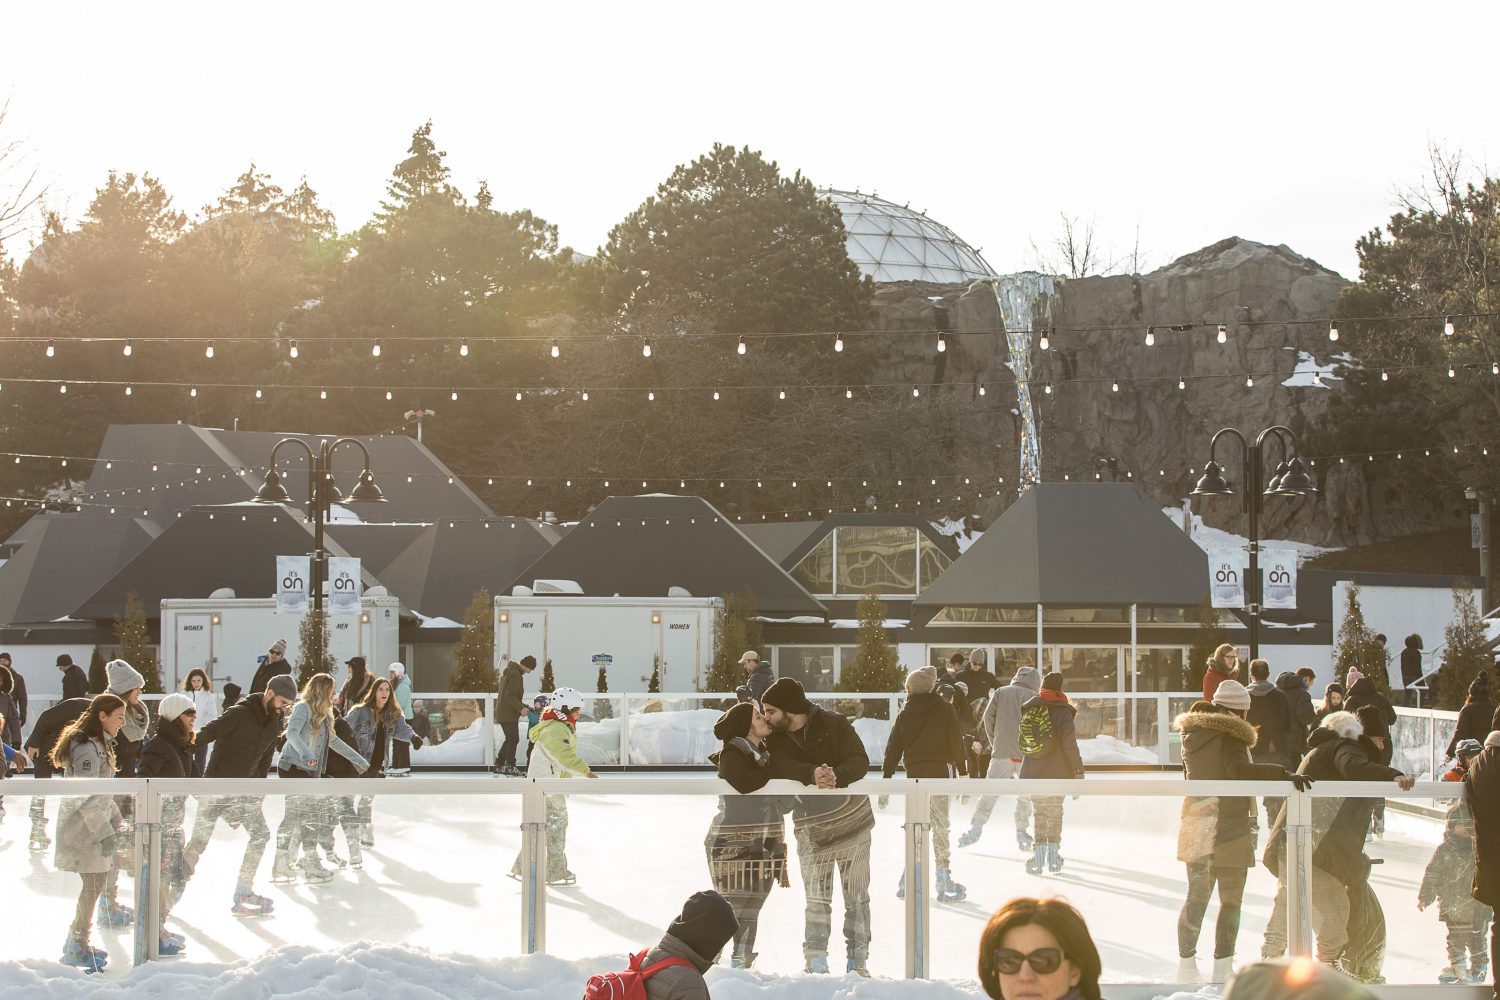 Ontario Place - How to spend the holidays in Toronto